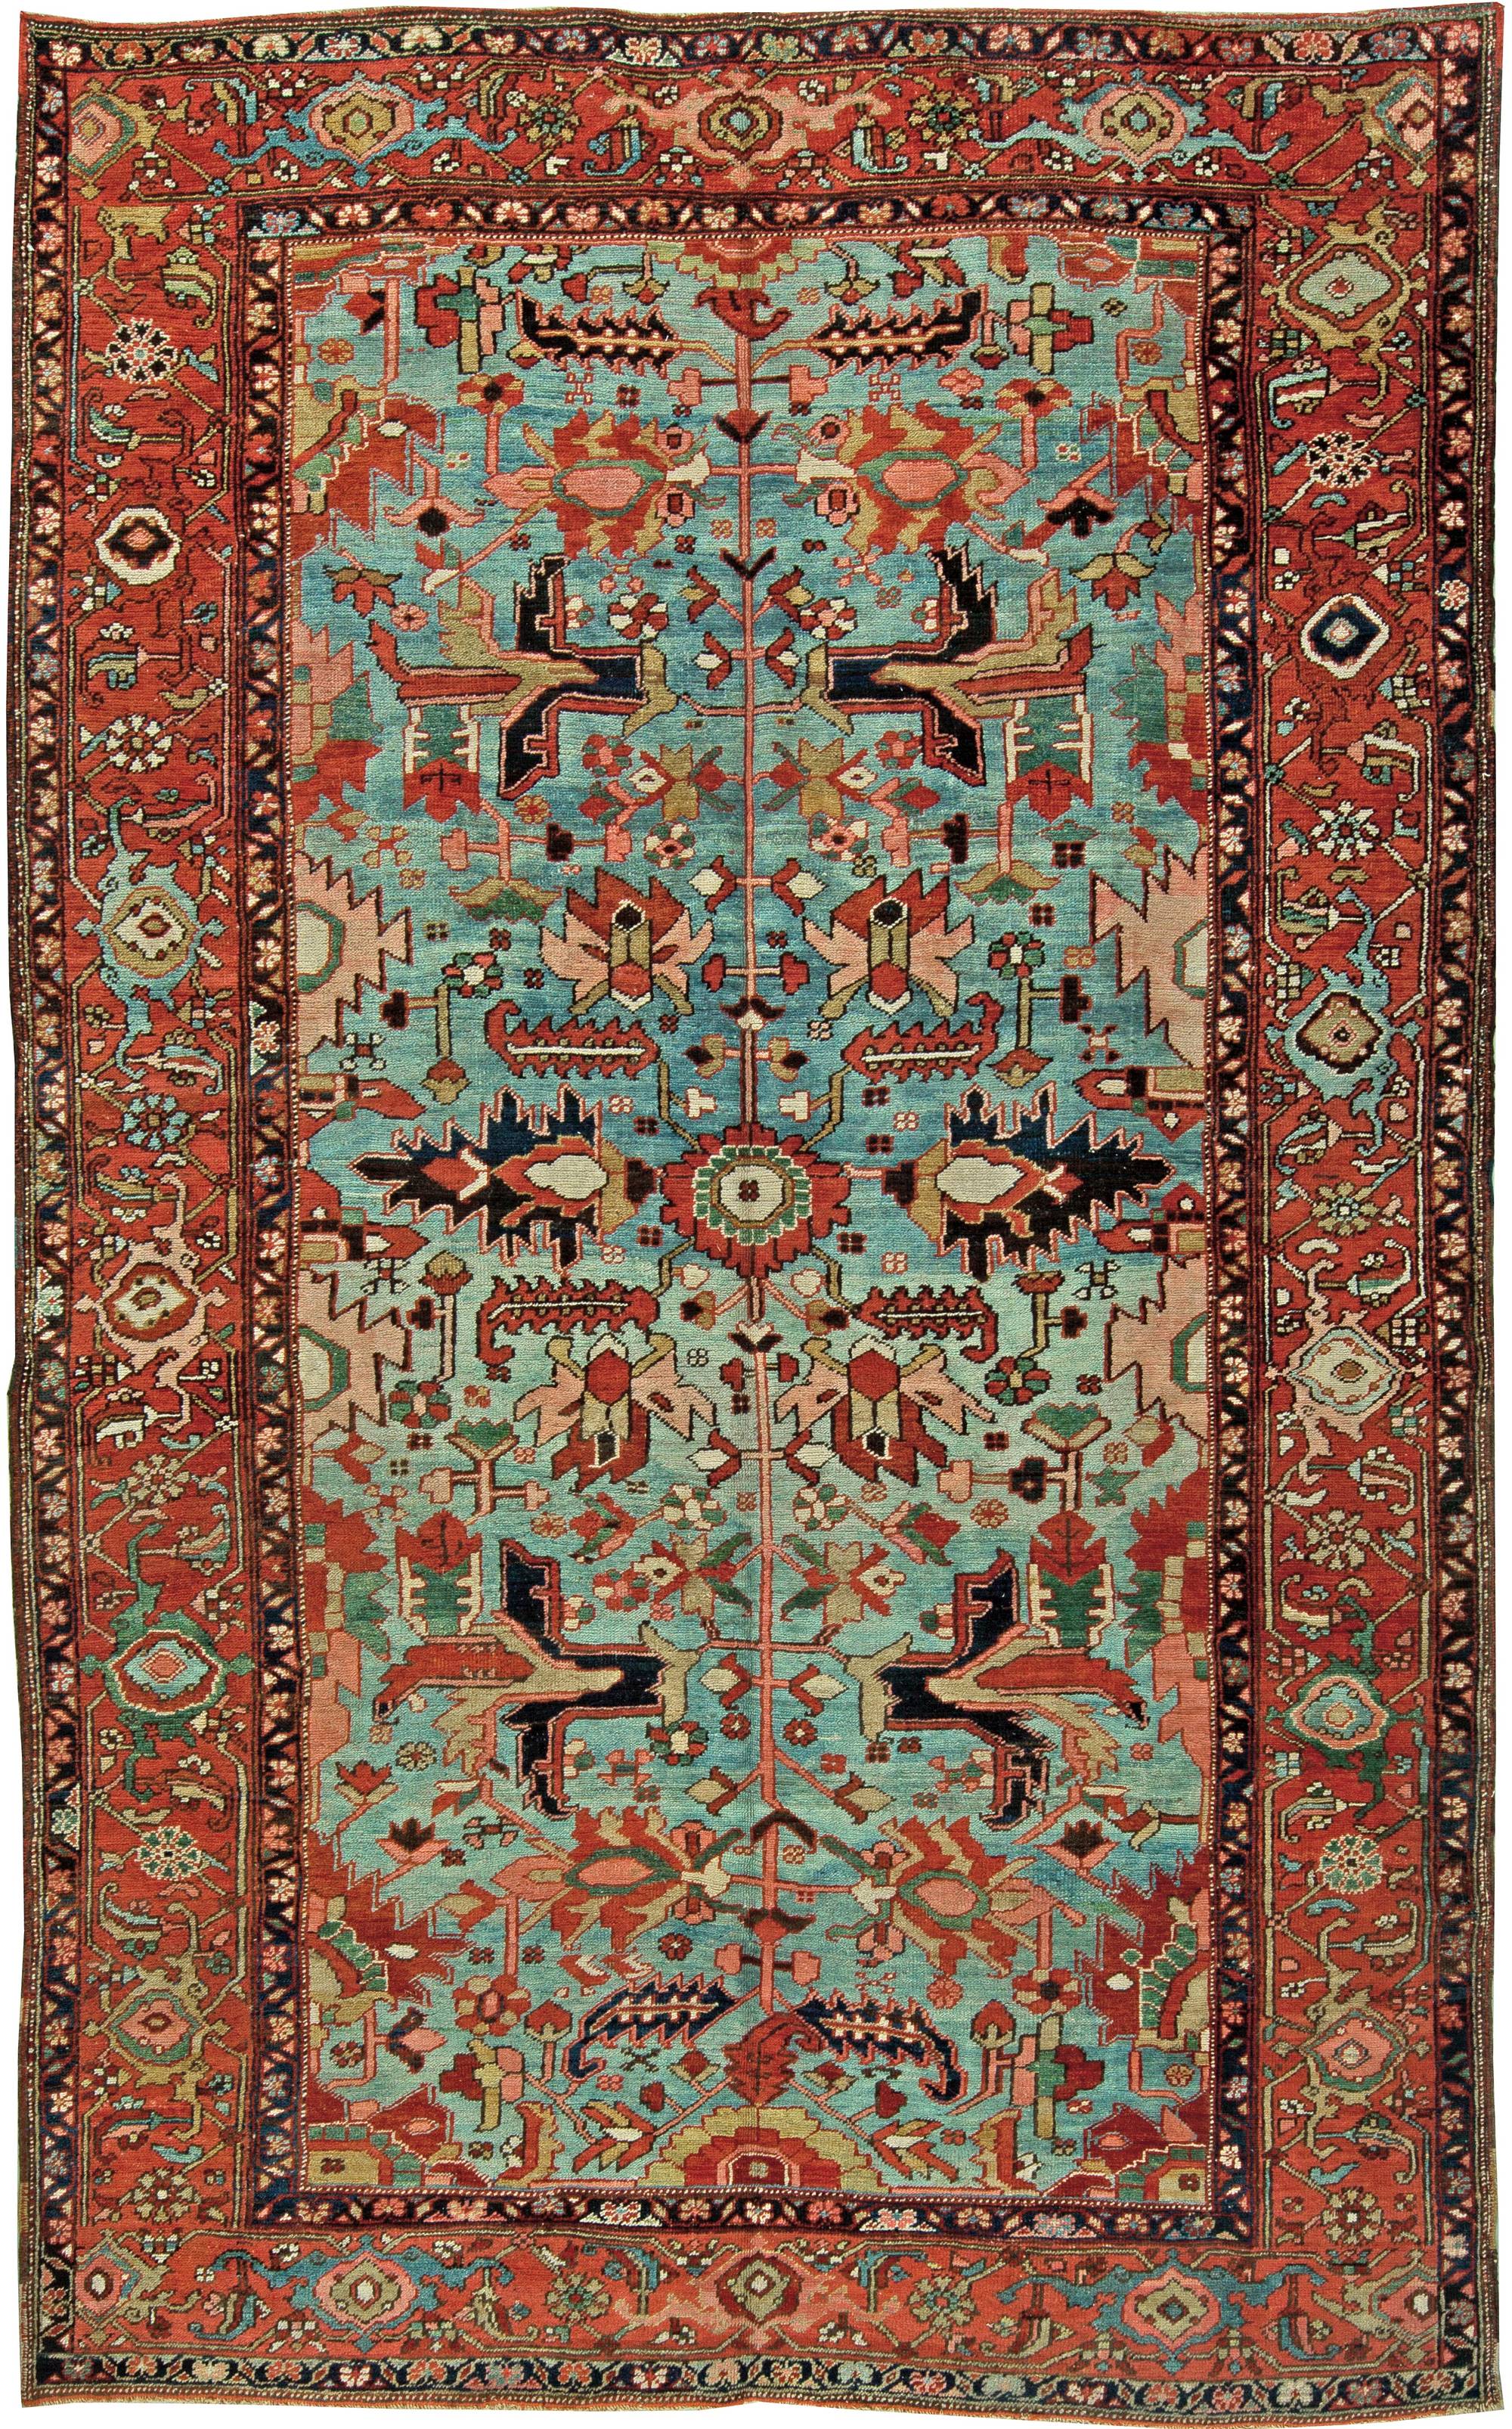 Ancient Northwestern Persian Rugs and Their Beauty by Doris Leslie Blau